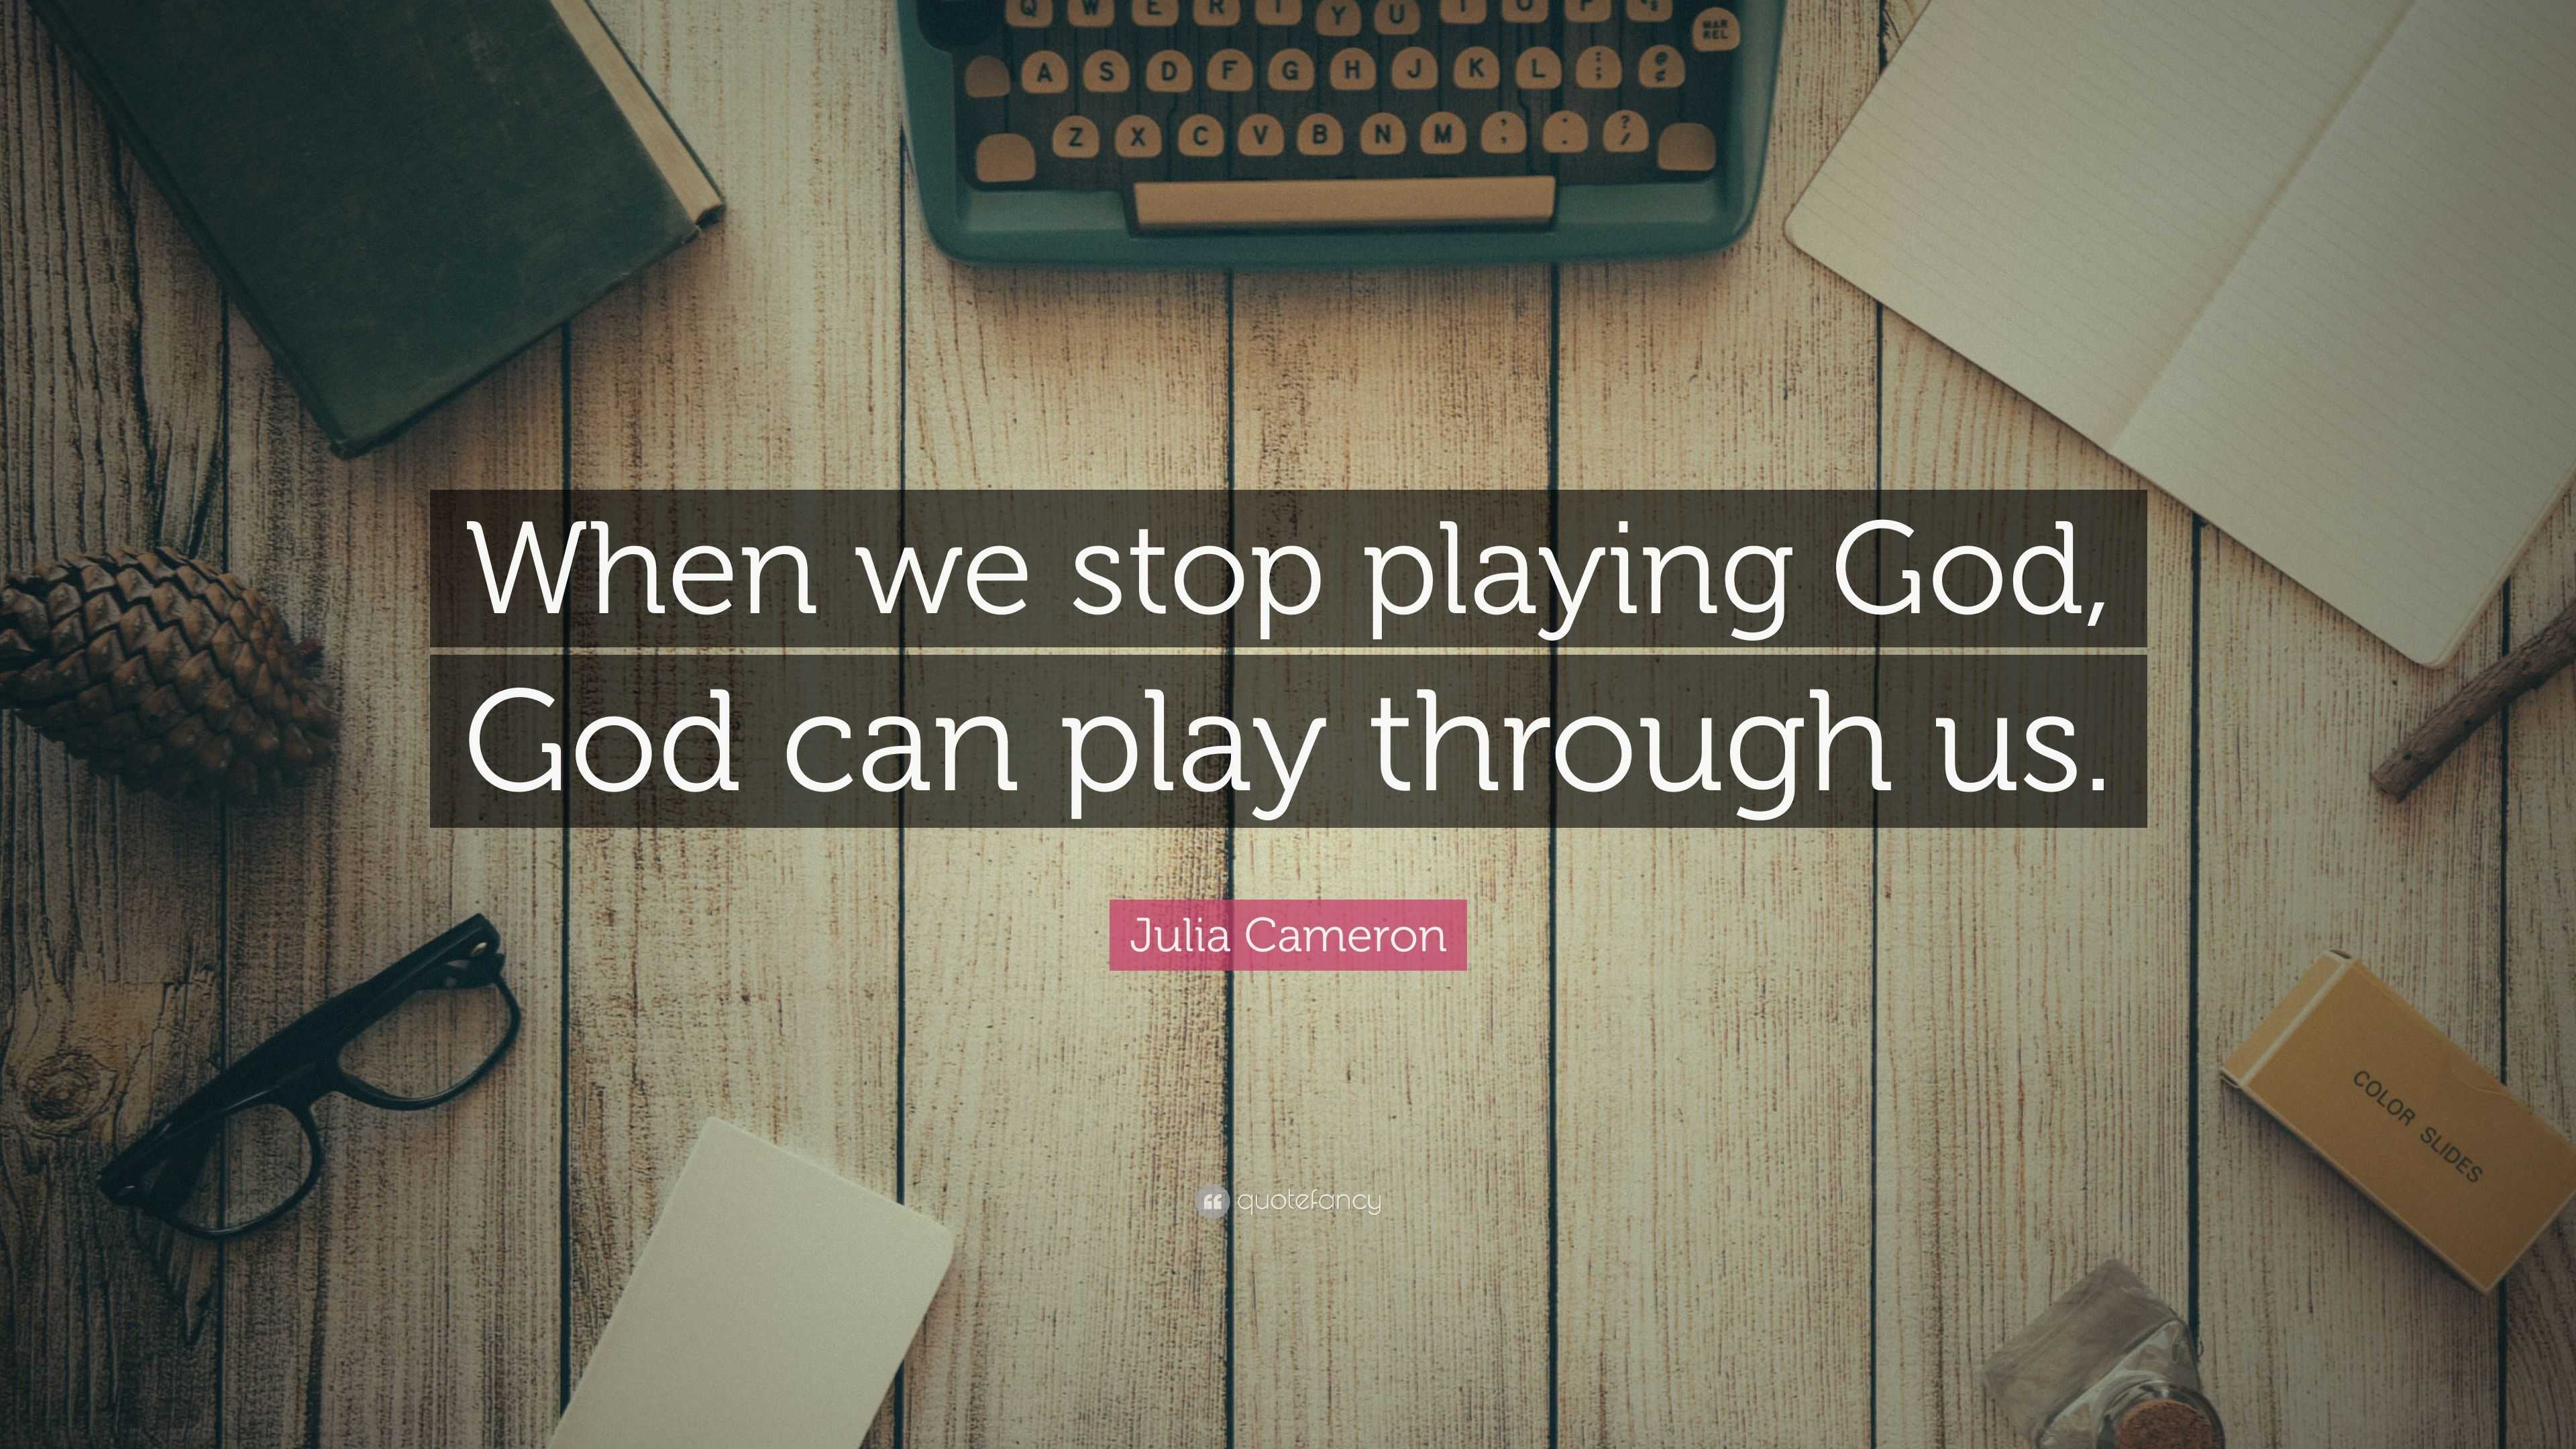 Julia Cameron Quote: “When we stop playing God, God can play